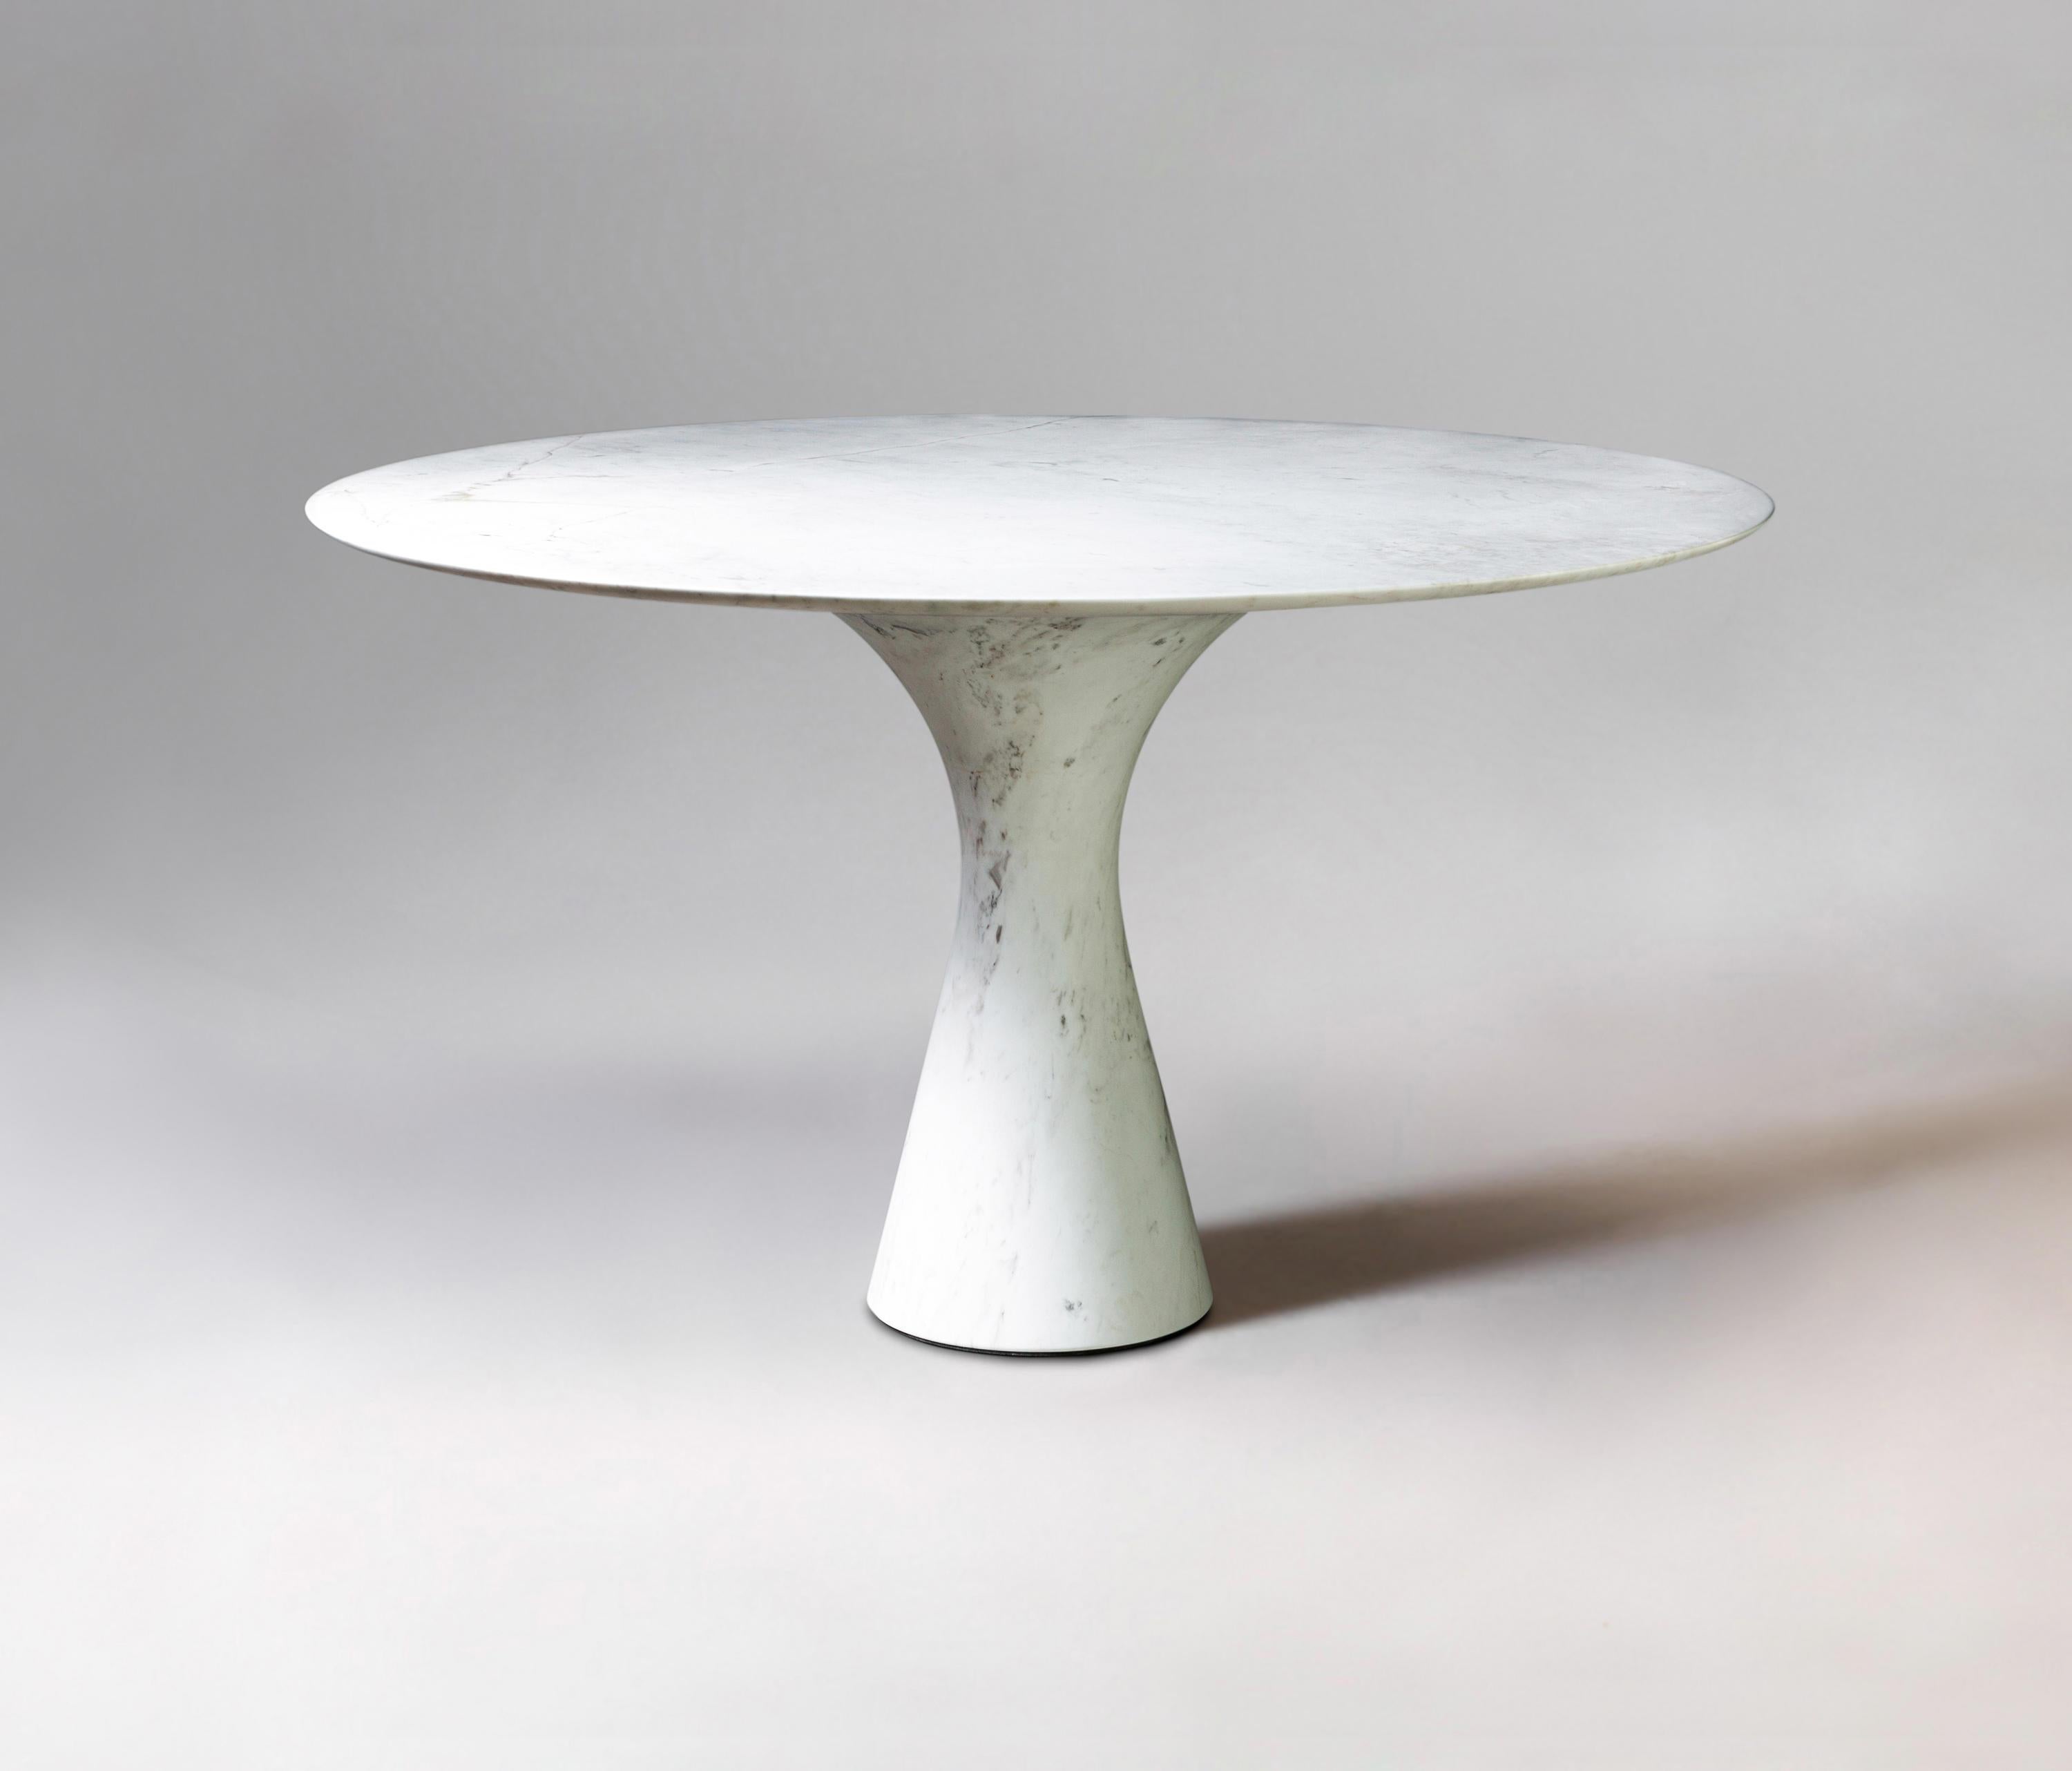 Bianco Statuarietto Refined Contemporary Marble Dining Table 130/75 For Sale 2